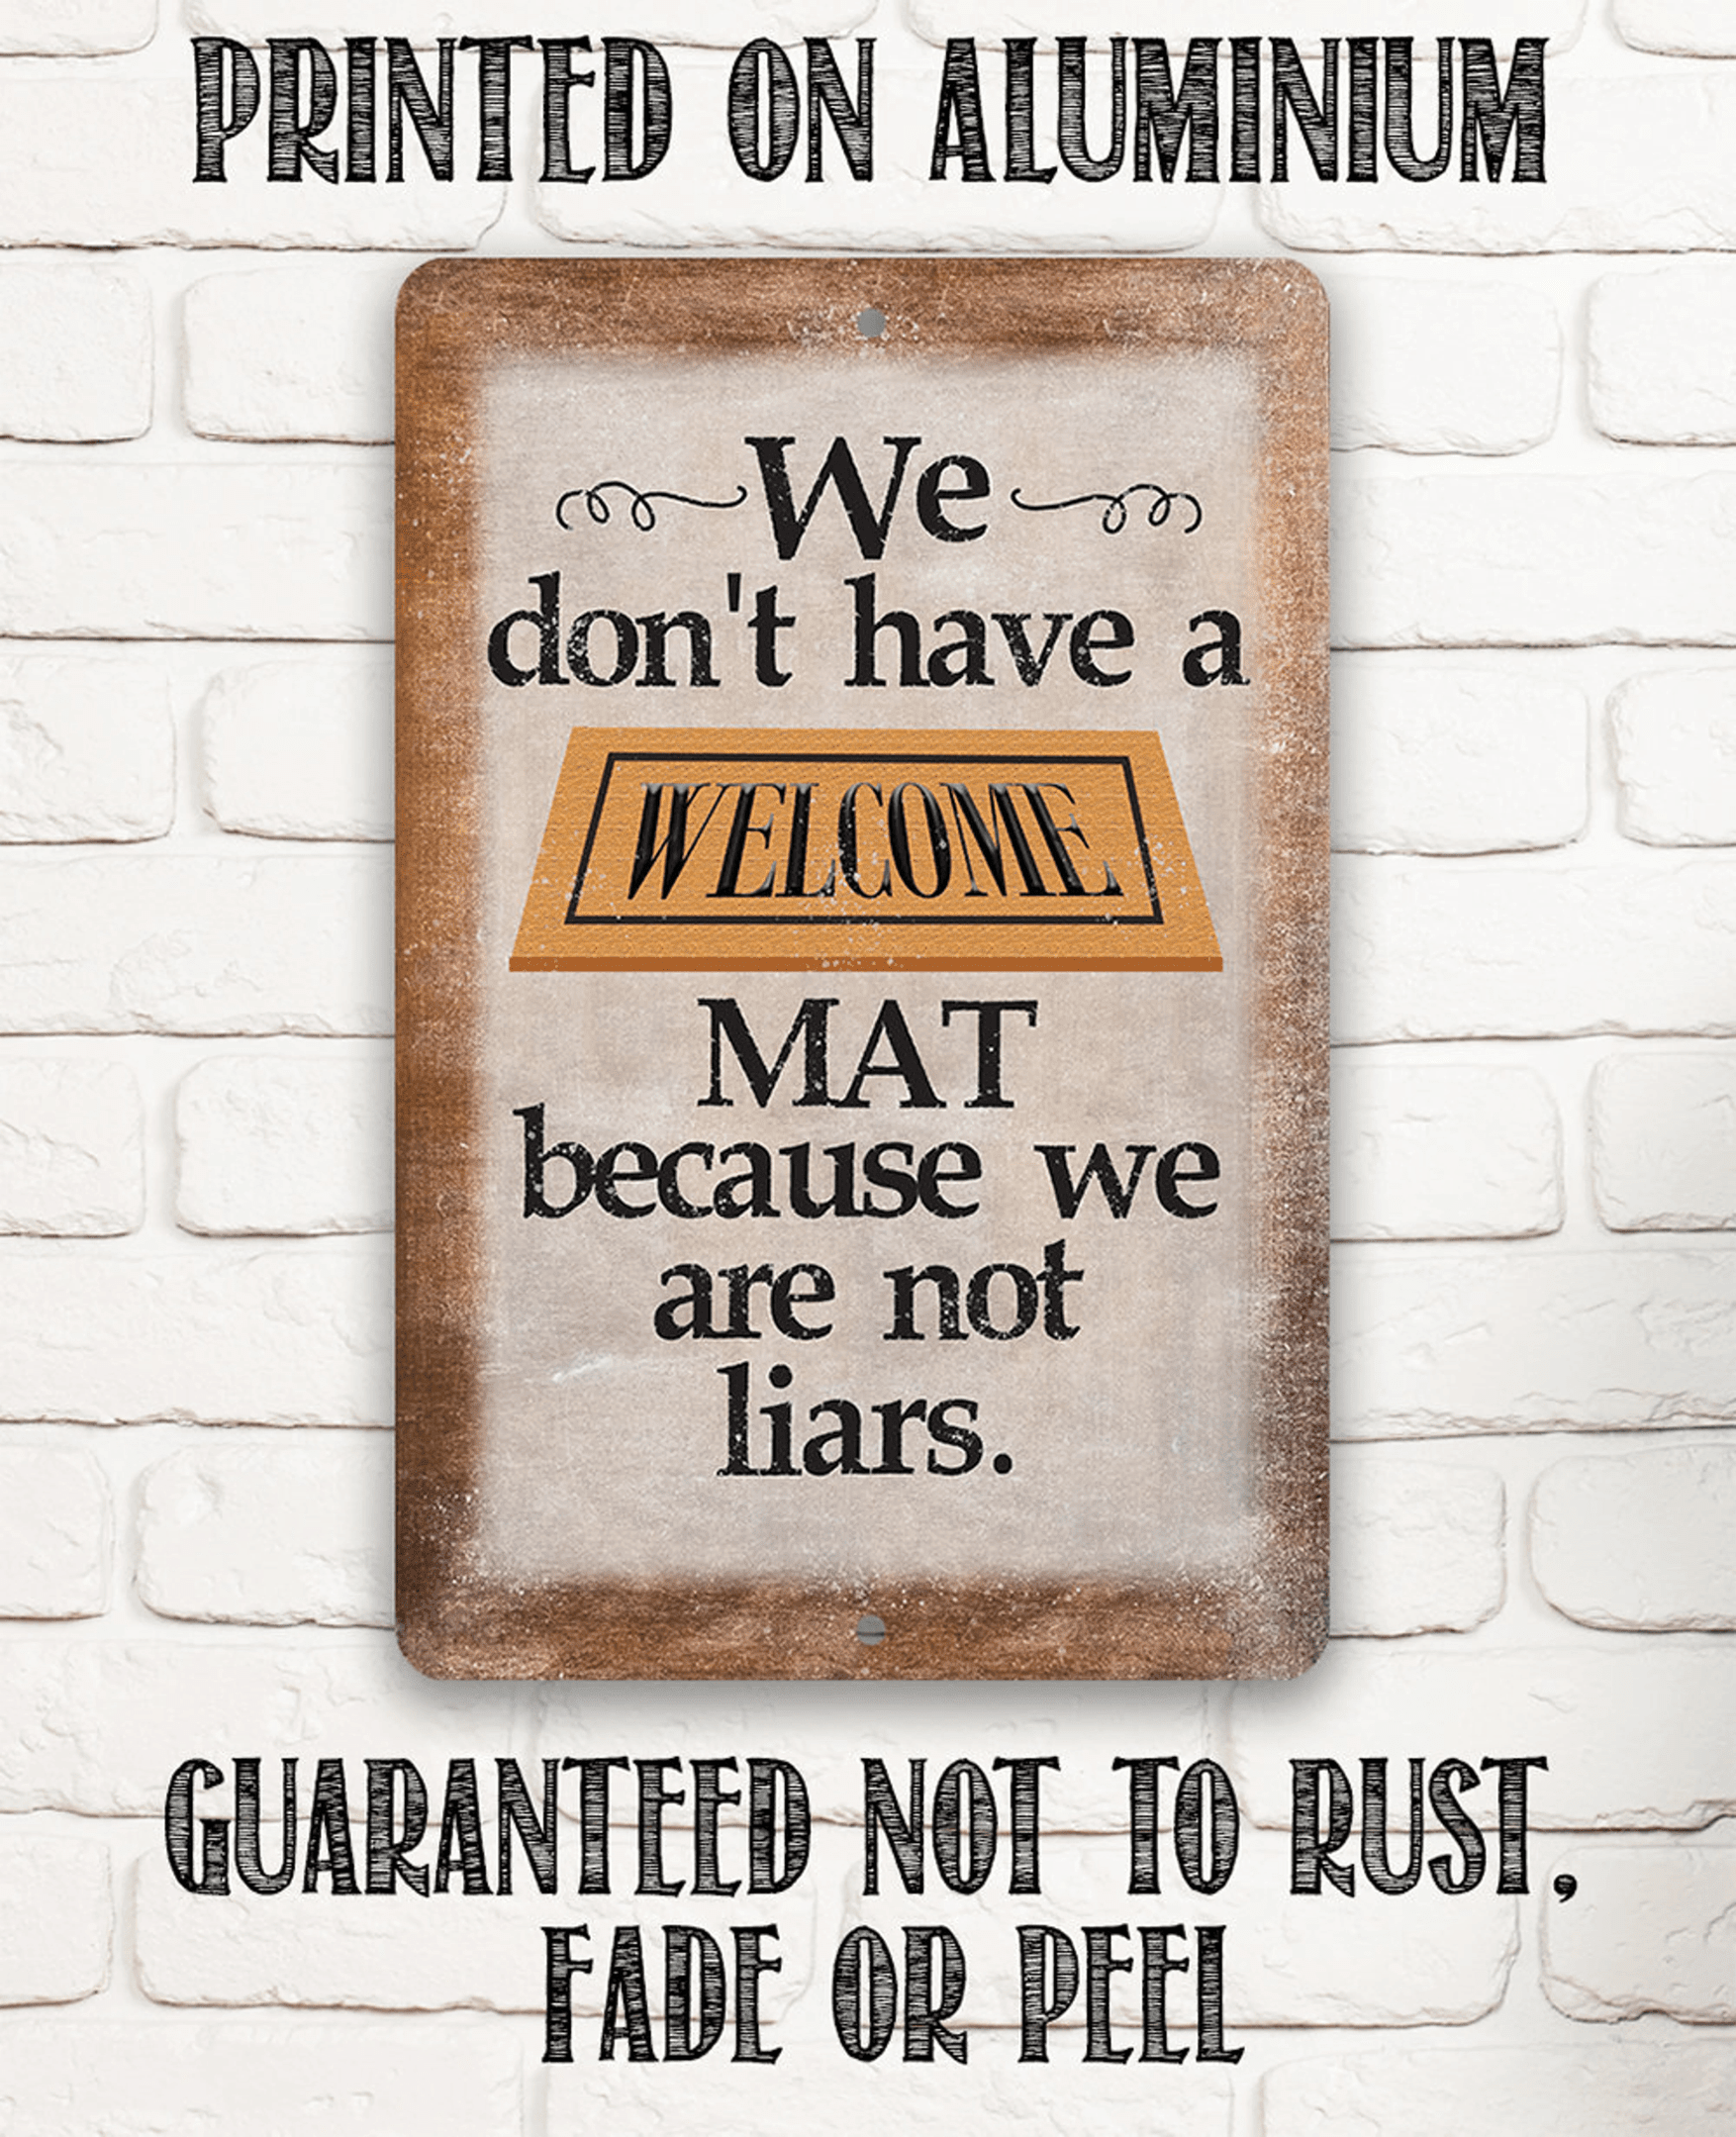 We Dont Have A Welcome Mat Aluminum Tin Awesome Metal Poster